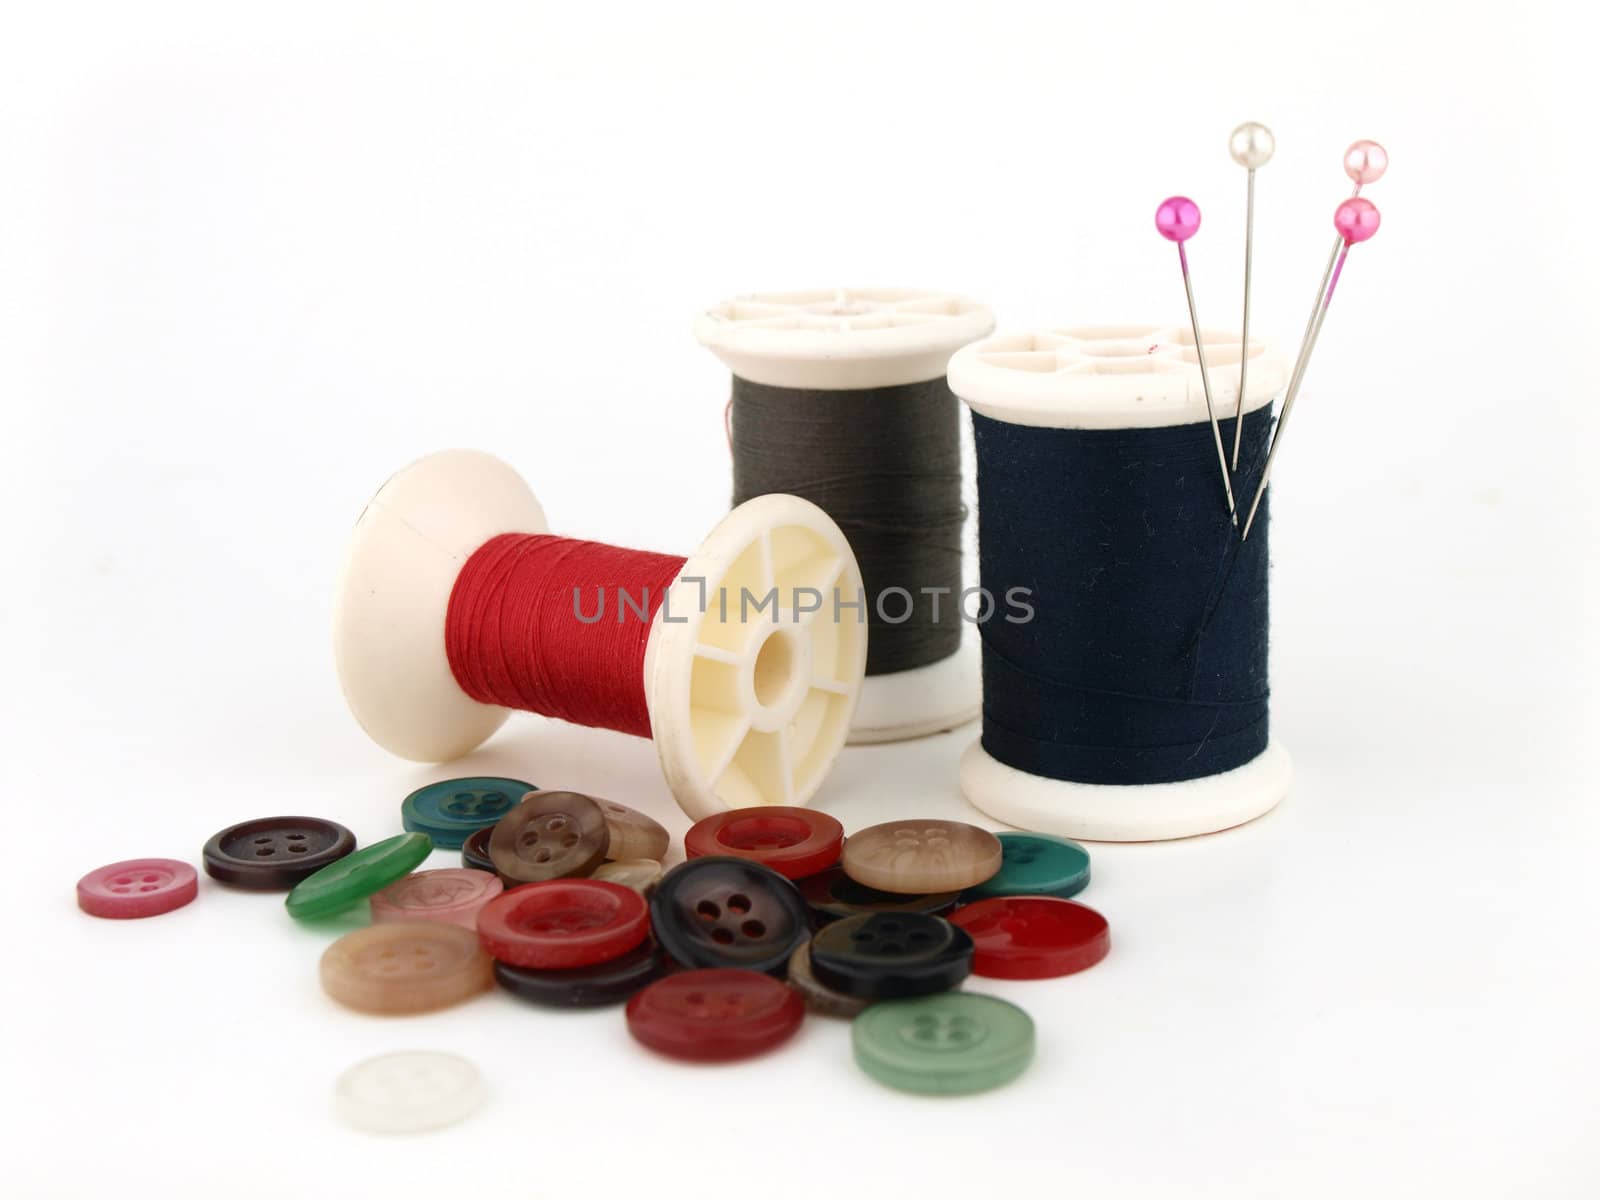 a spool of thread, needle and button by jakgree